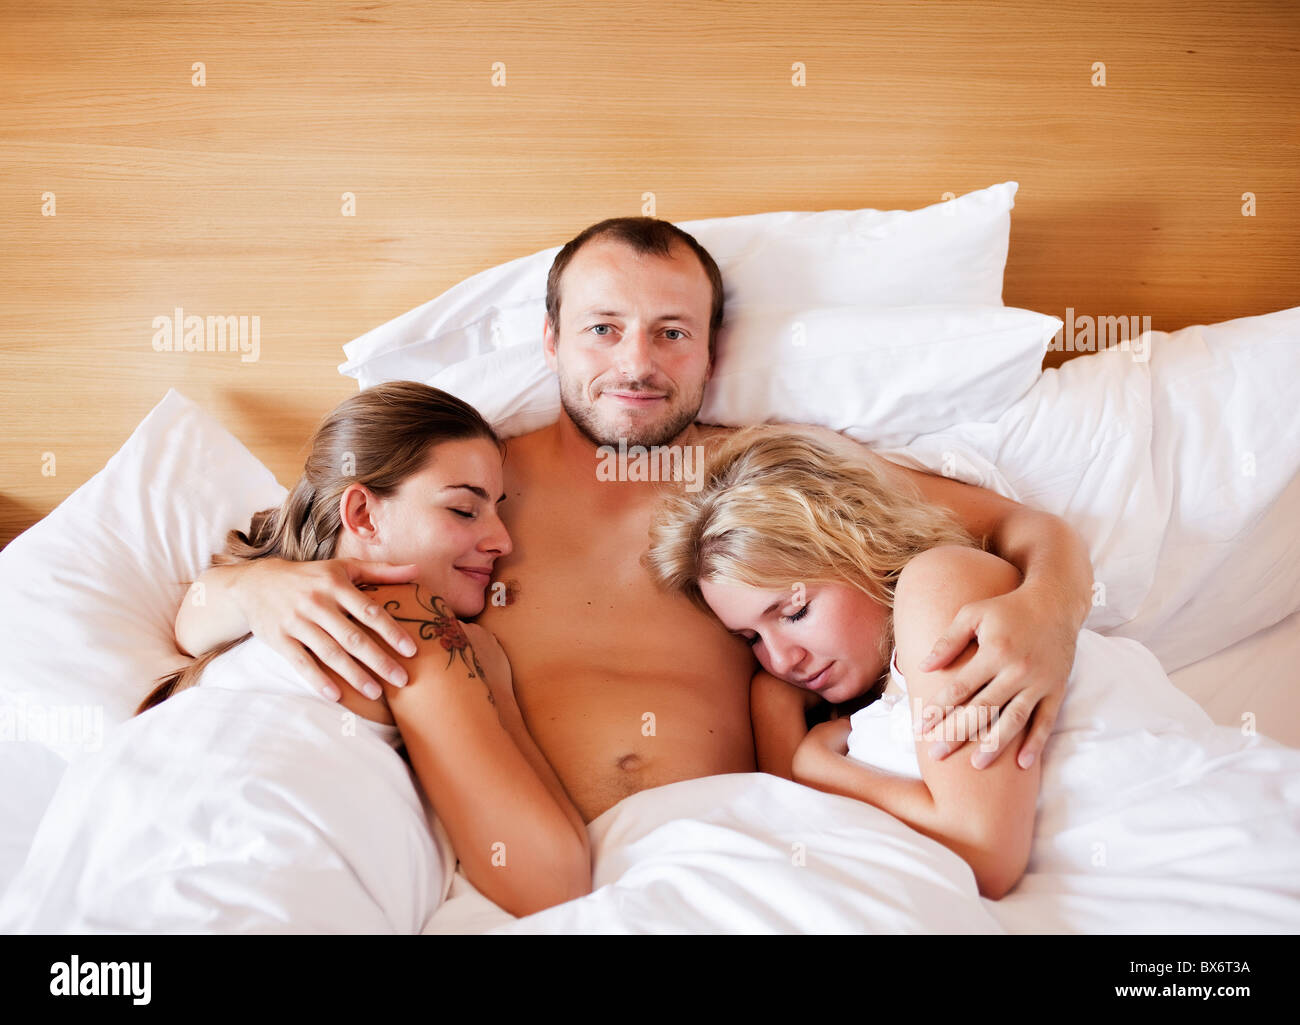 marriage, marital triangle, man, woman, women, bed, sex Stock Photo pic pic